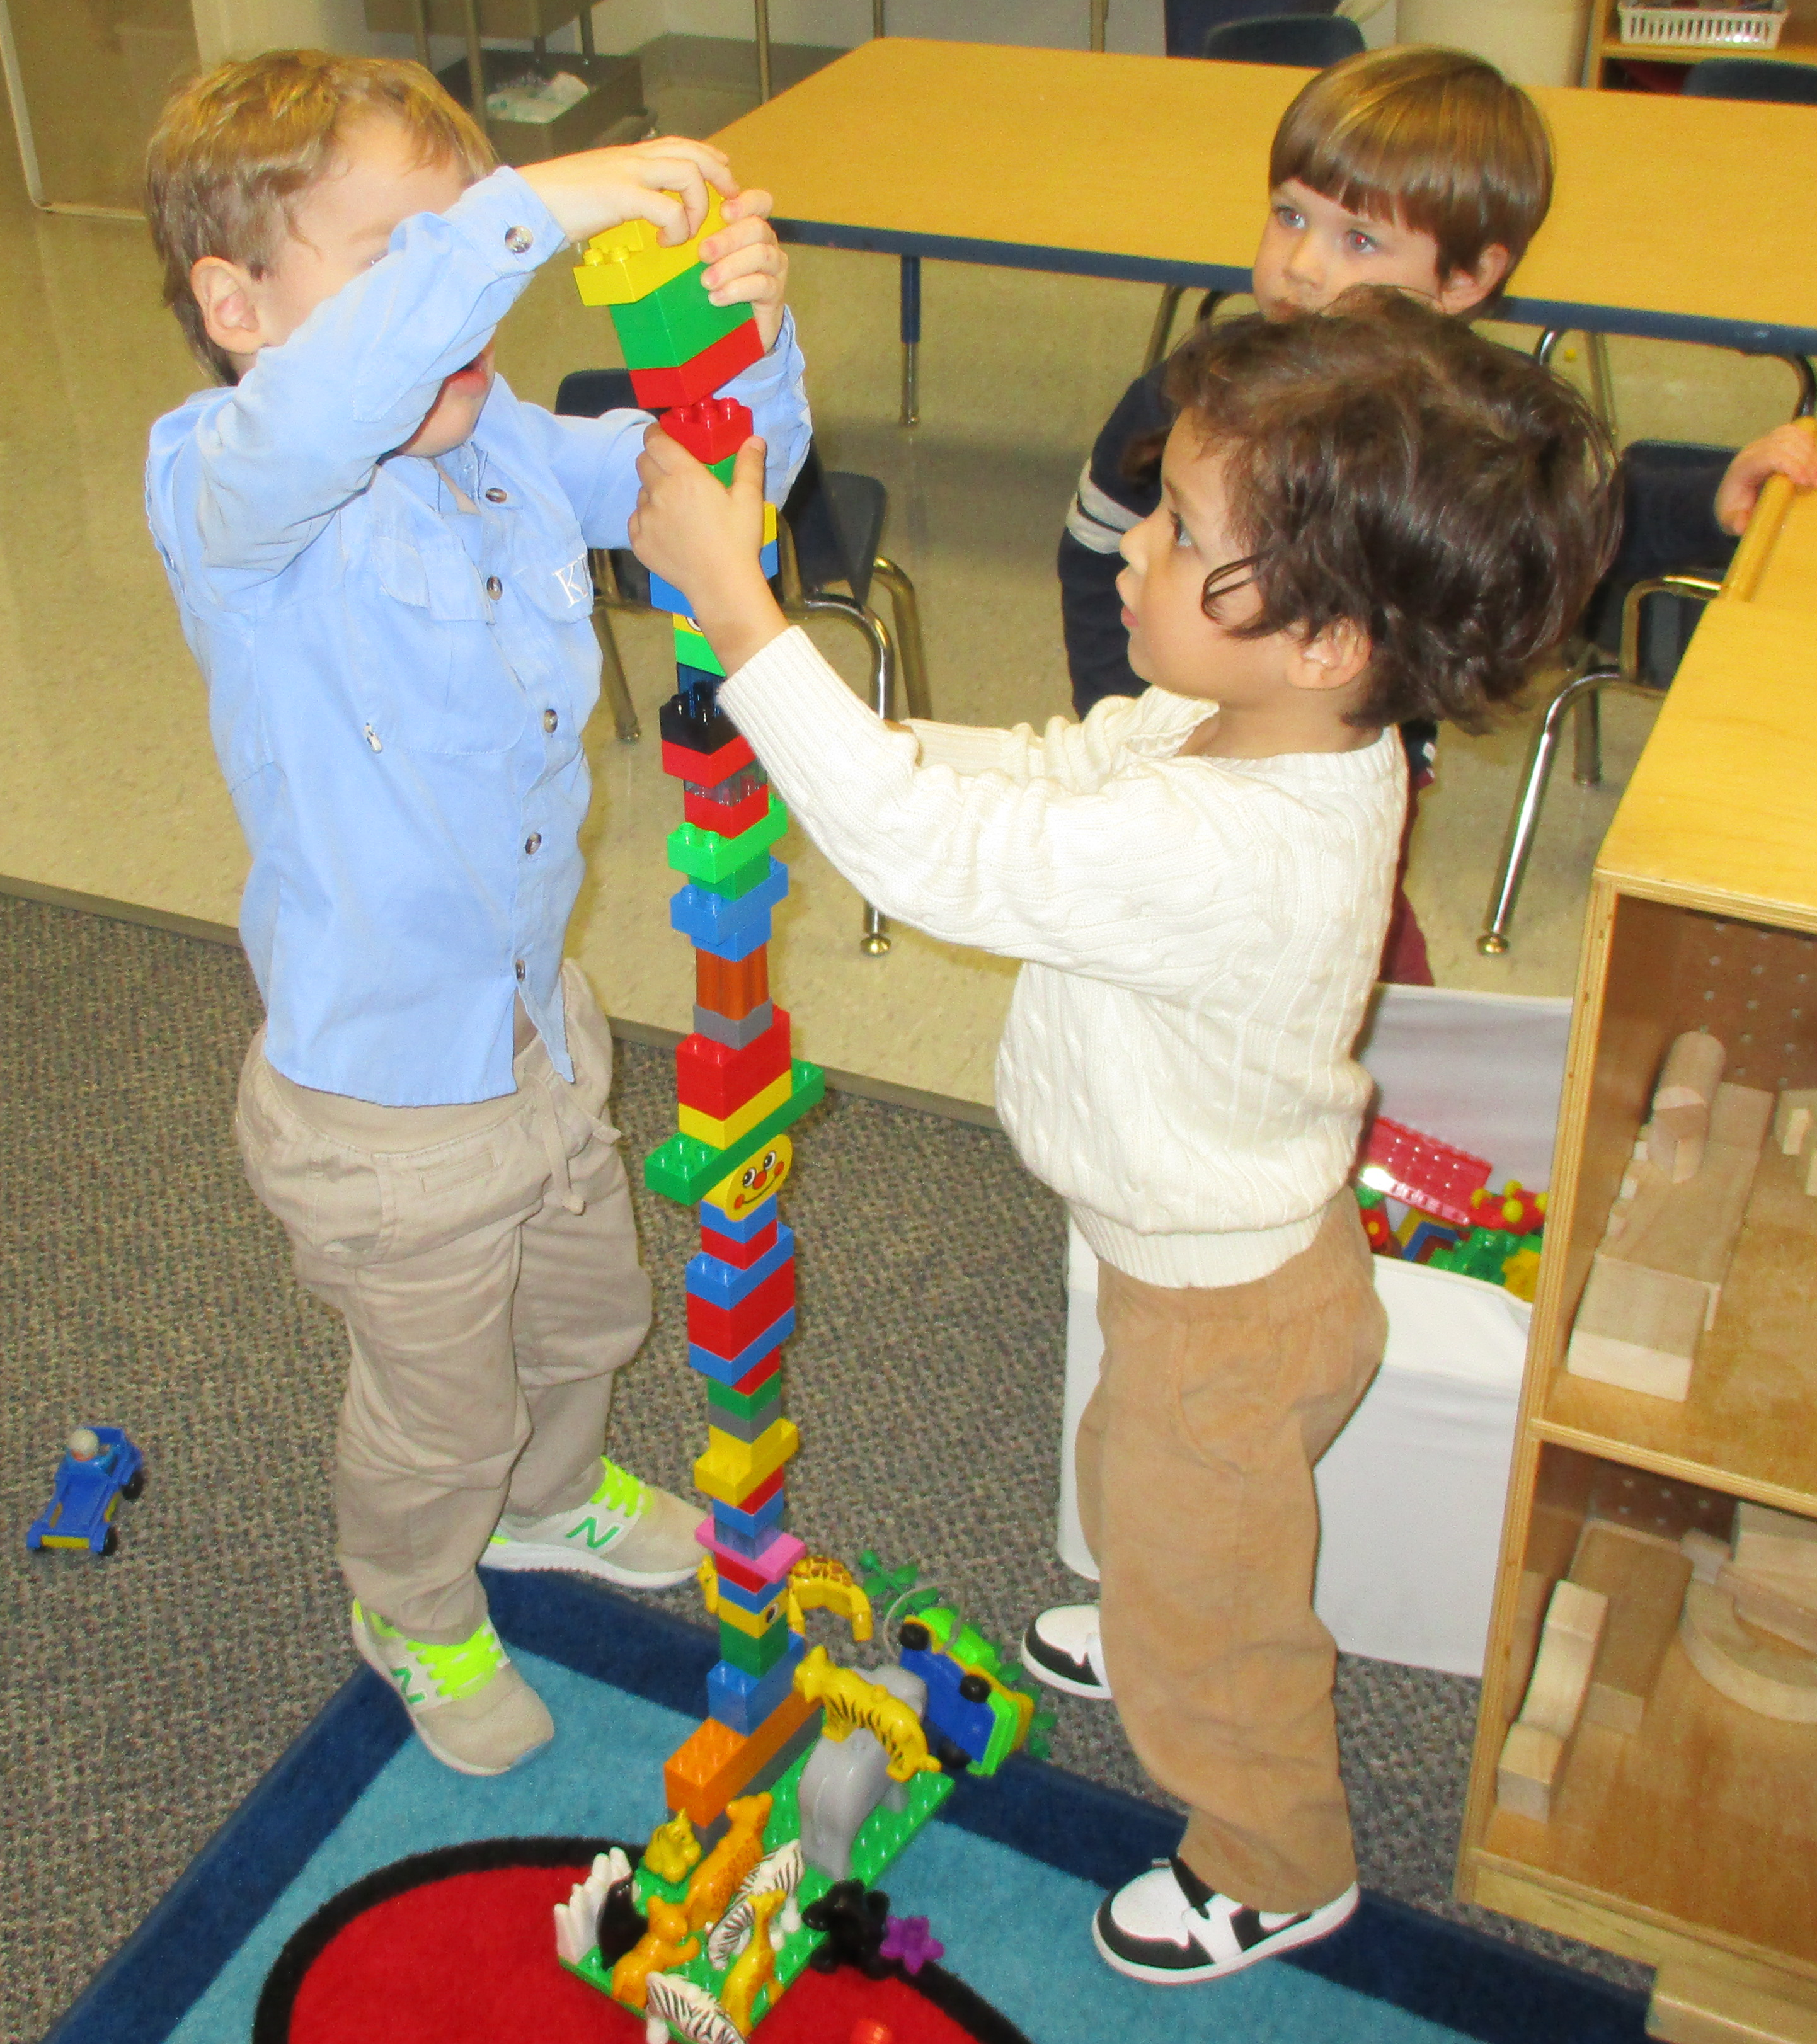 THREE YEAR OLF BUILDING A TOWER